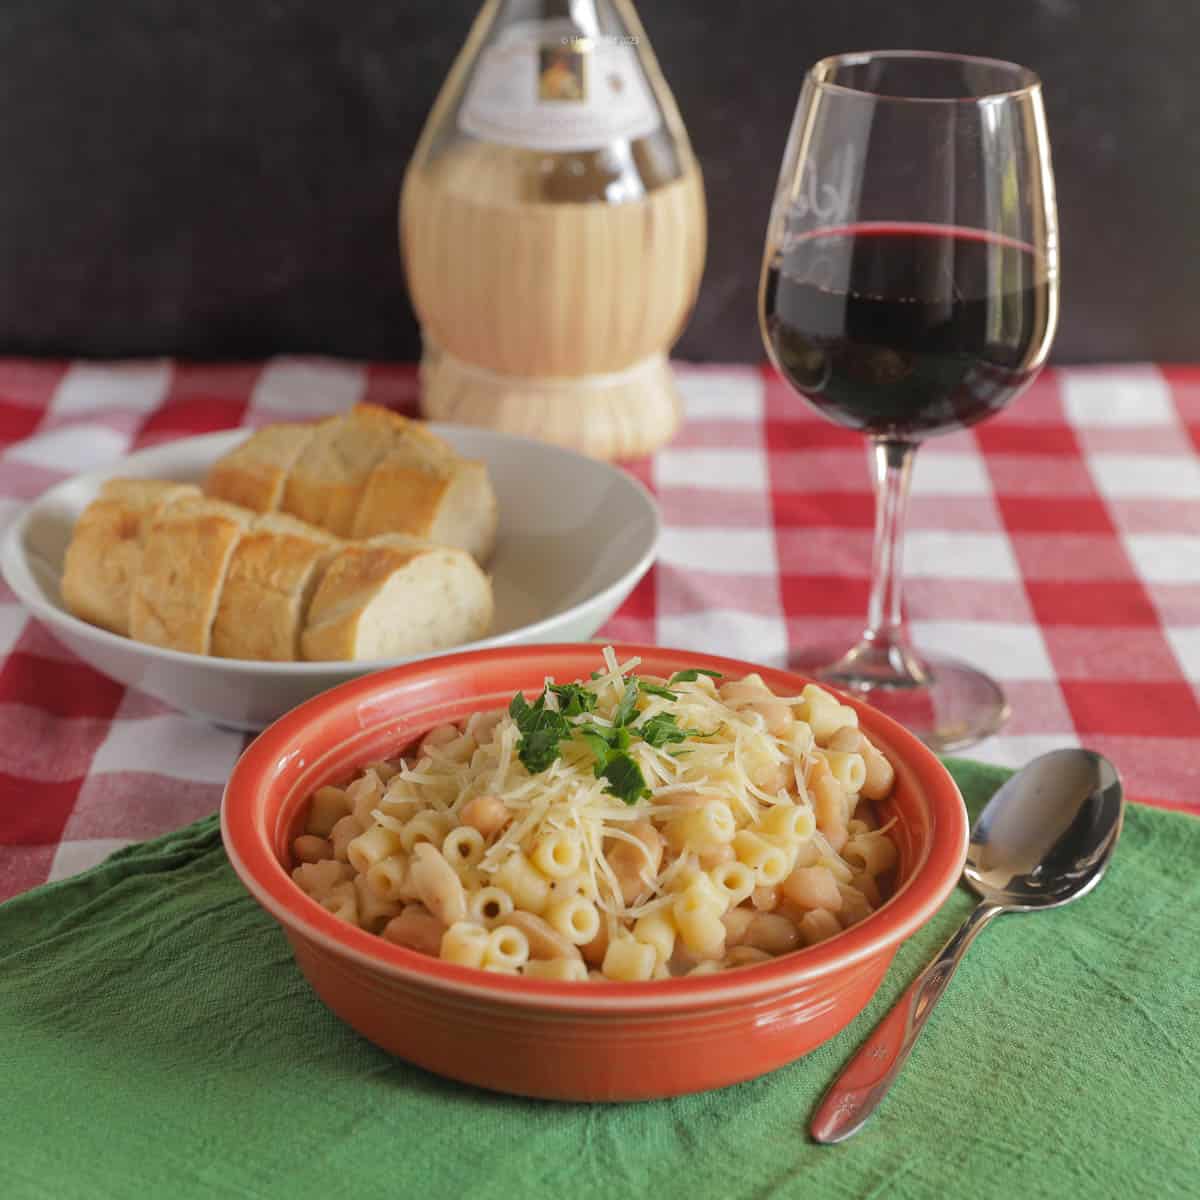 A bowl of pasta fagioli witting on a red checkered tablecloth with a green napkin, a spoon, a bowl with slices of French bread, a glass of red wine, and a bottle of chianti in the background.